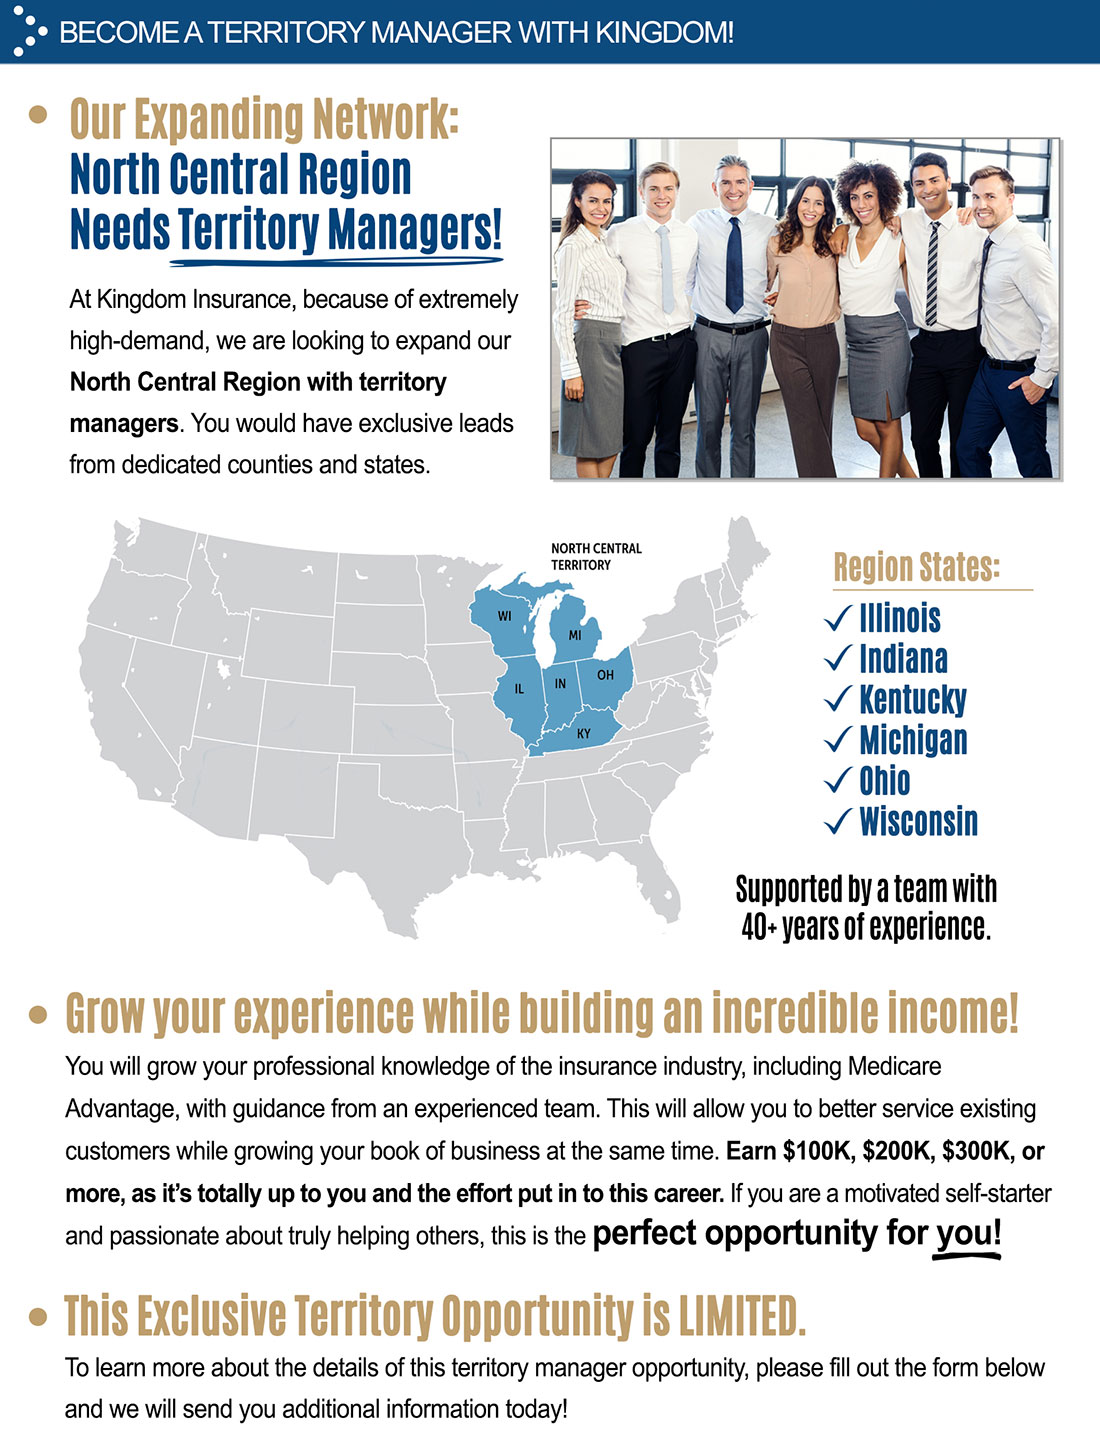 North Central needs territory managers!